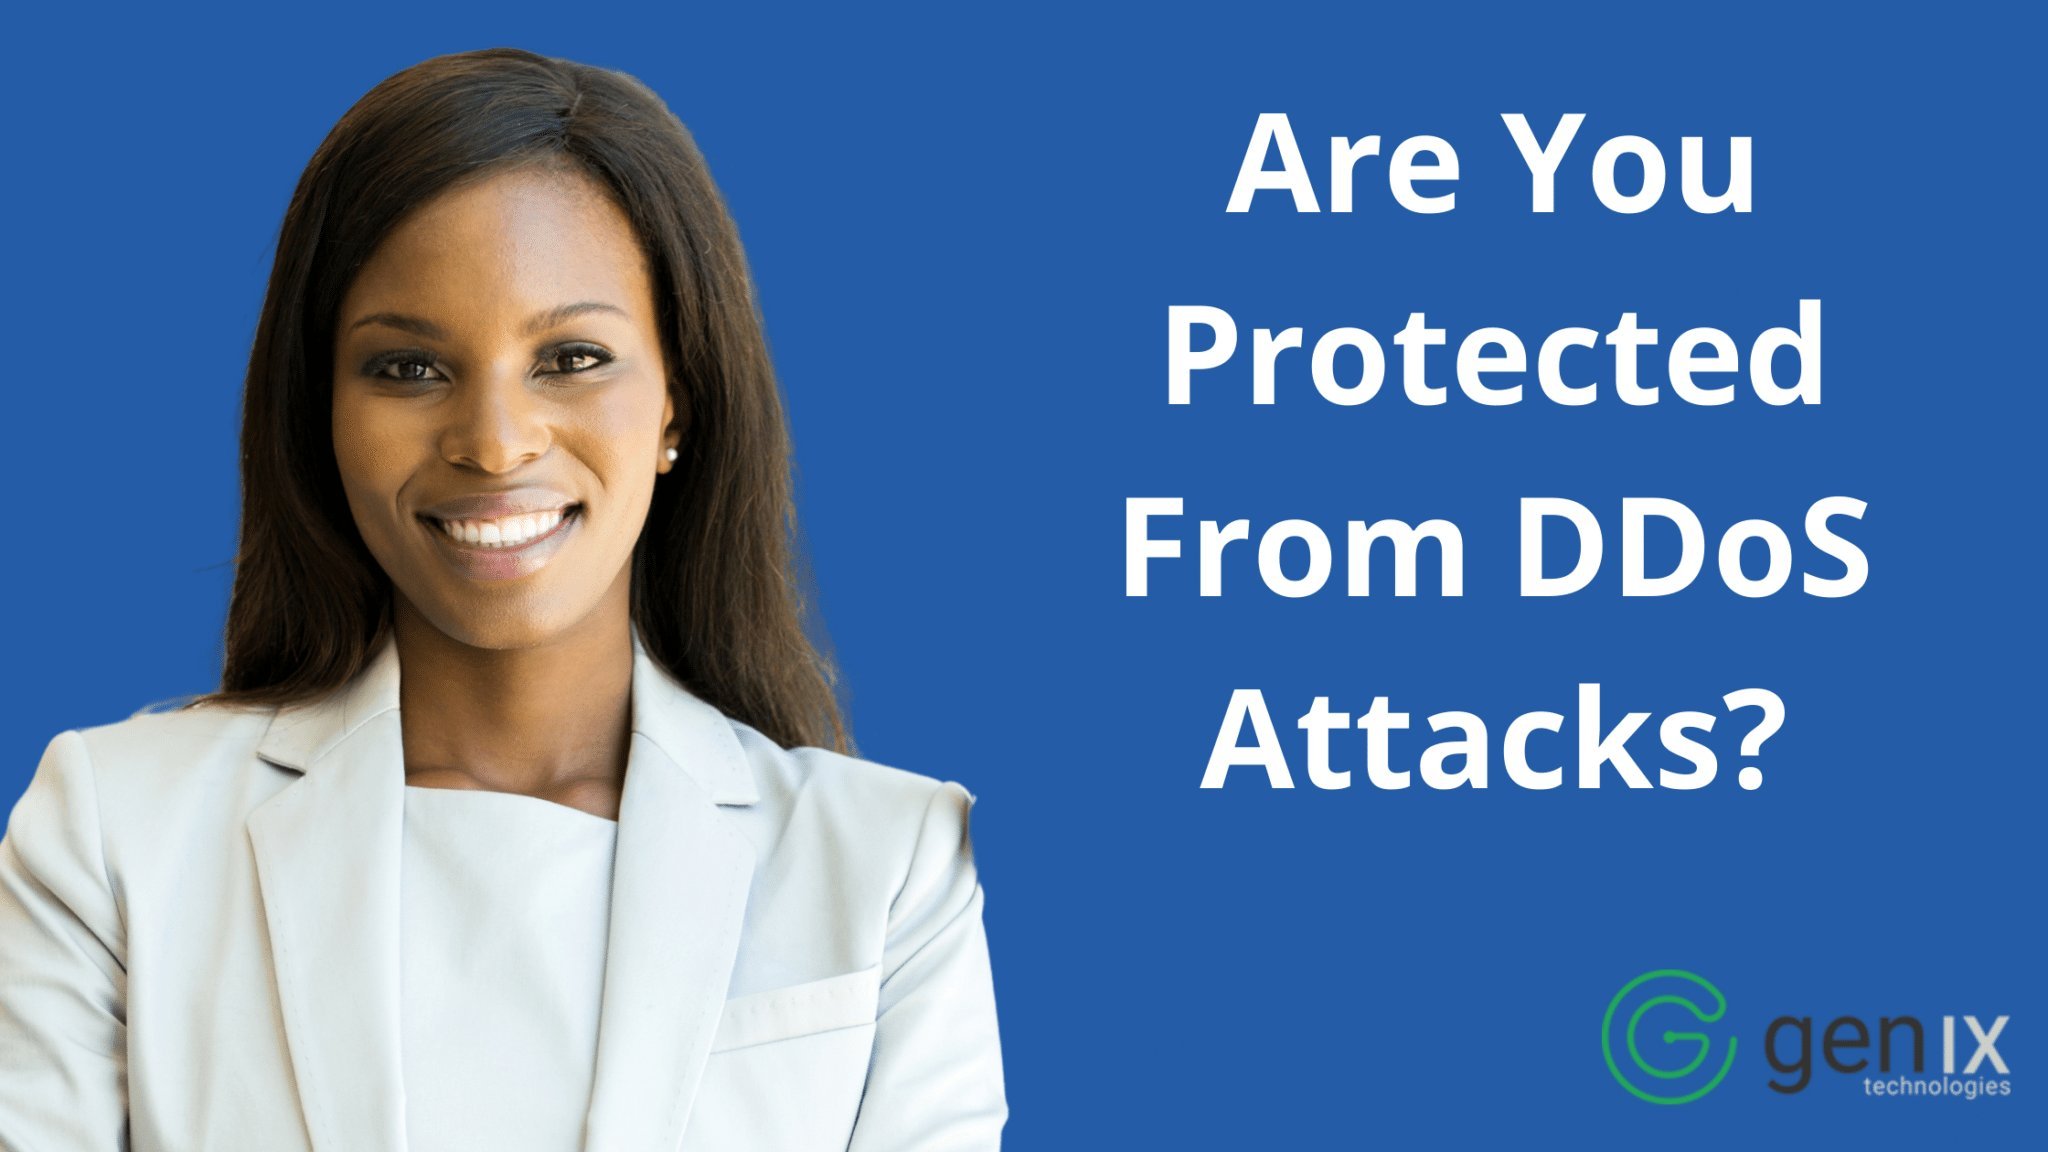 Are You Protected From DDoS Attacks?